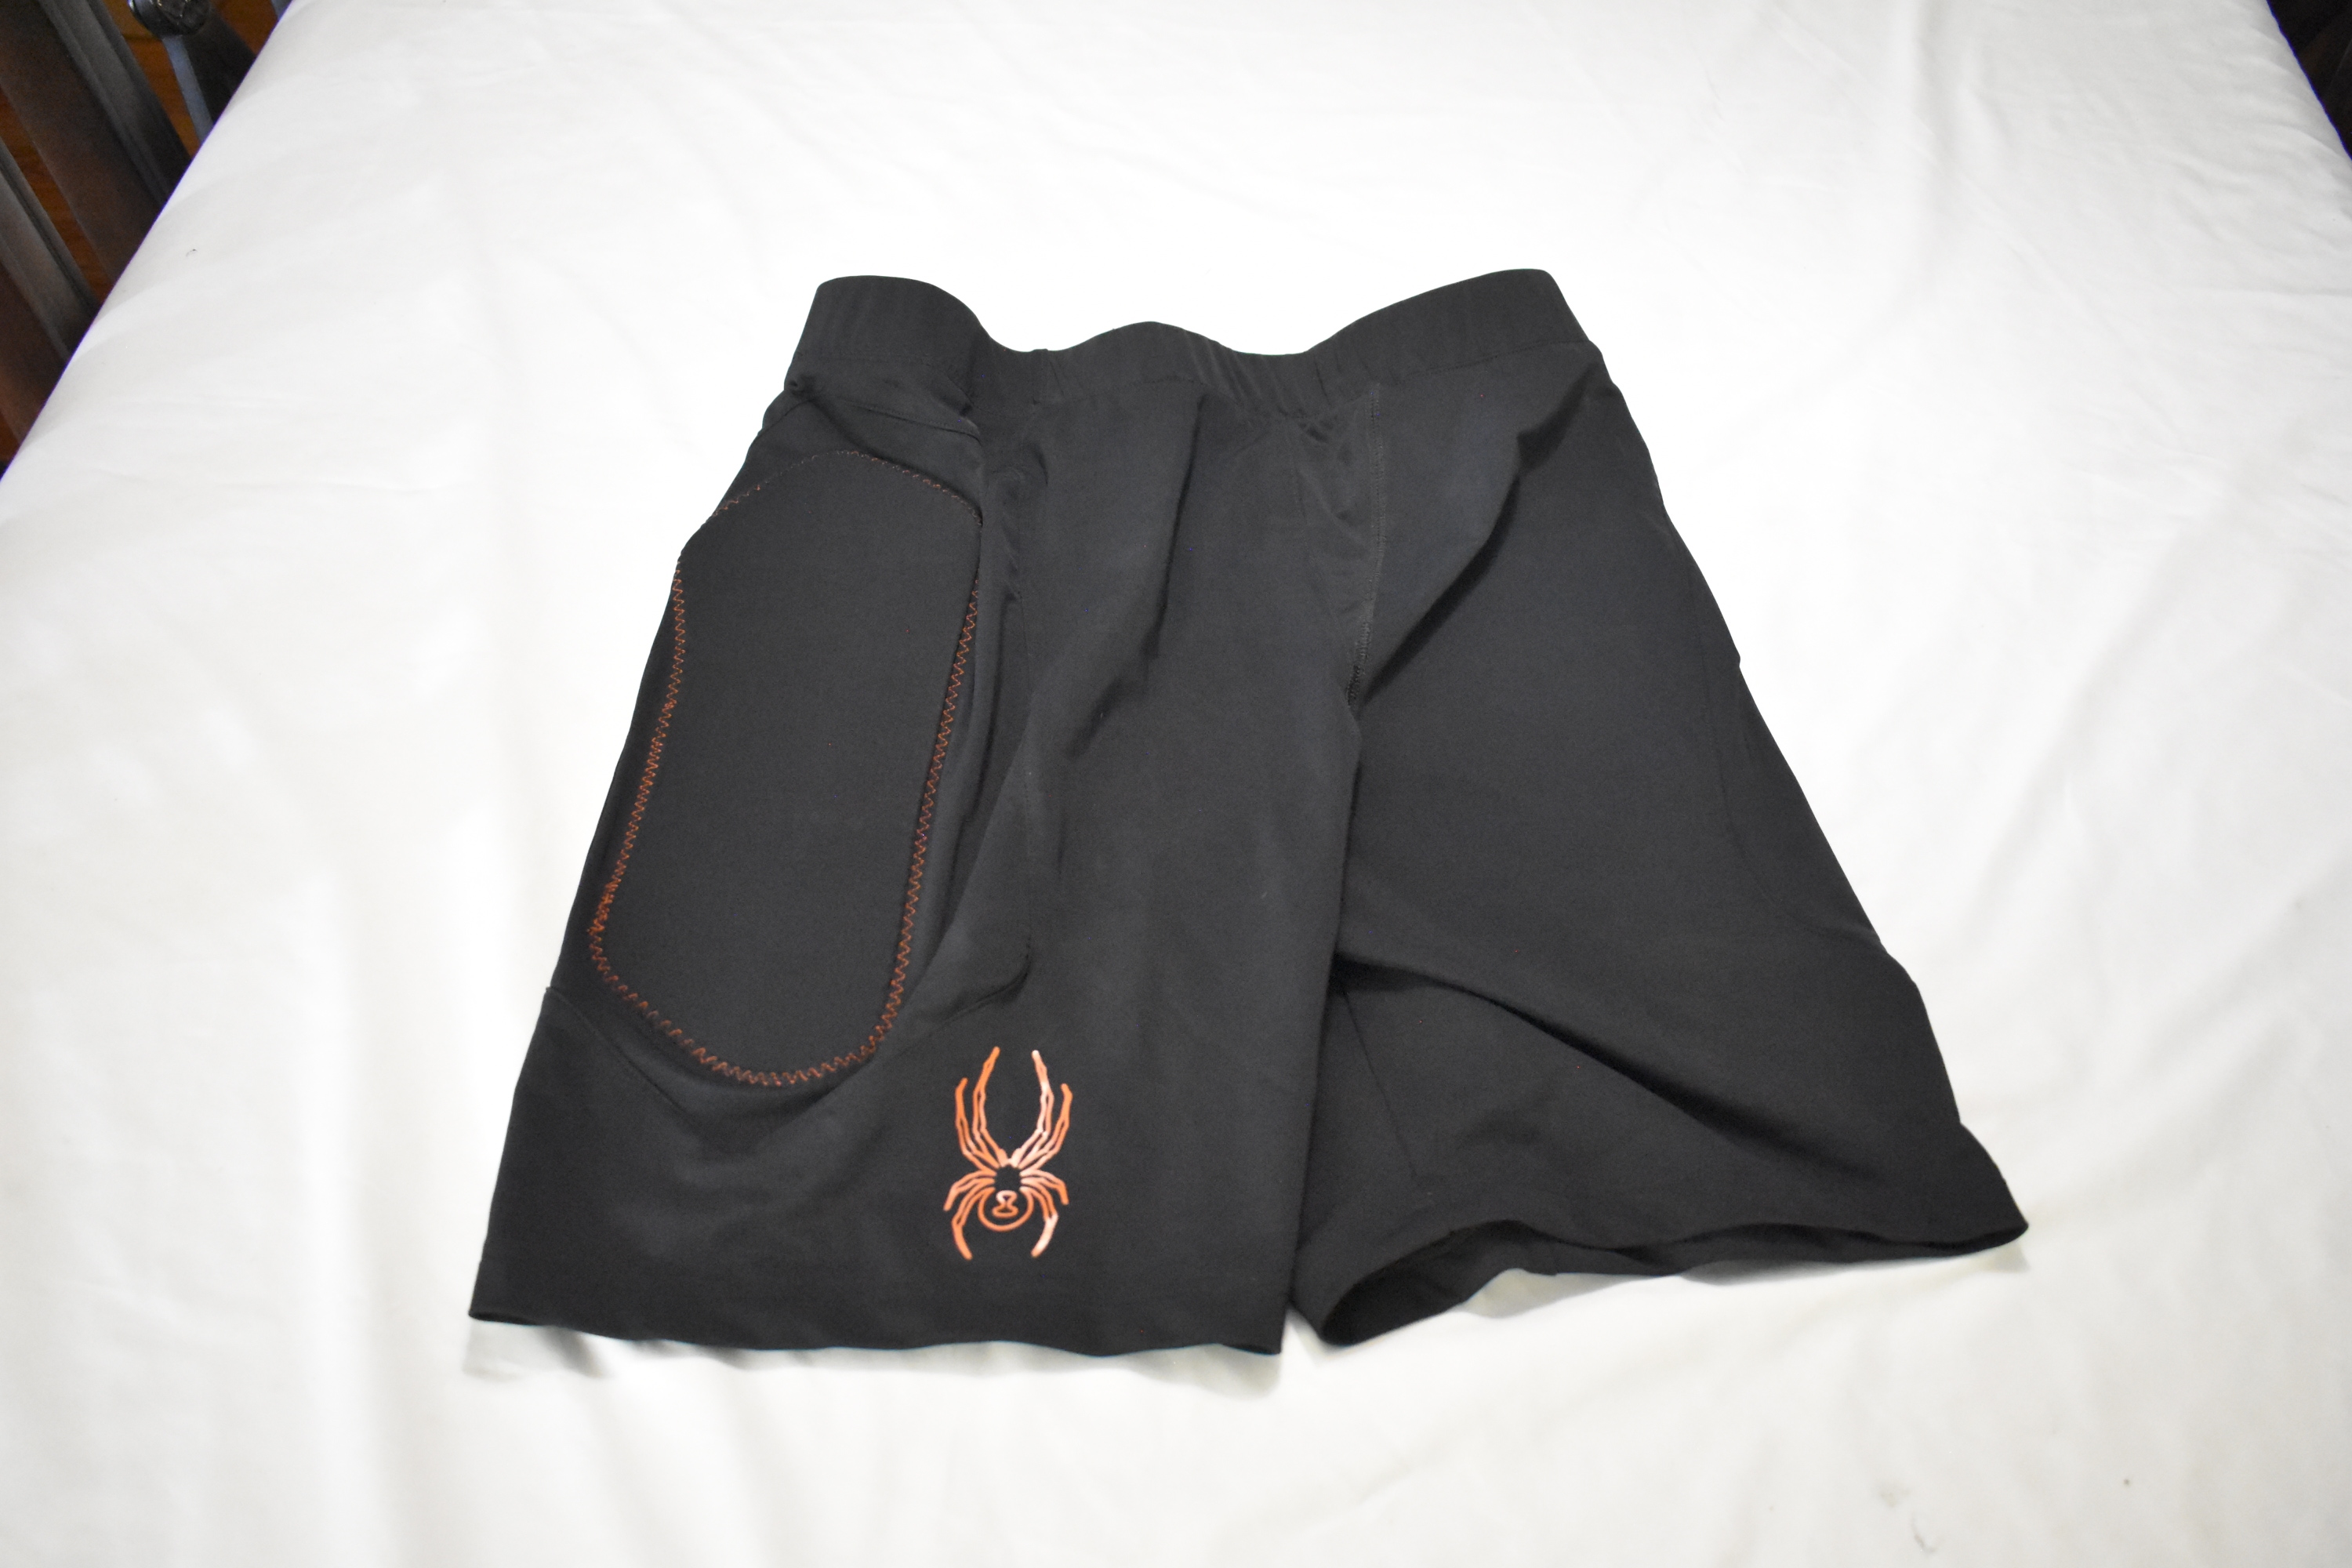 Spyder Protective Shorts / Bottom Armor w/D30, Large - Top Condition!